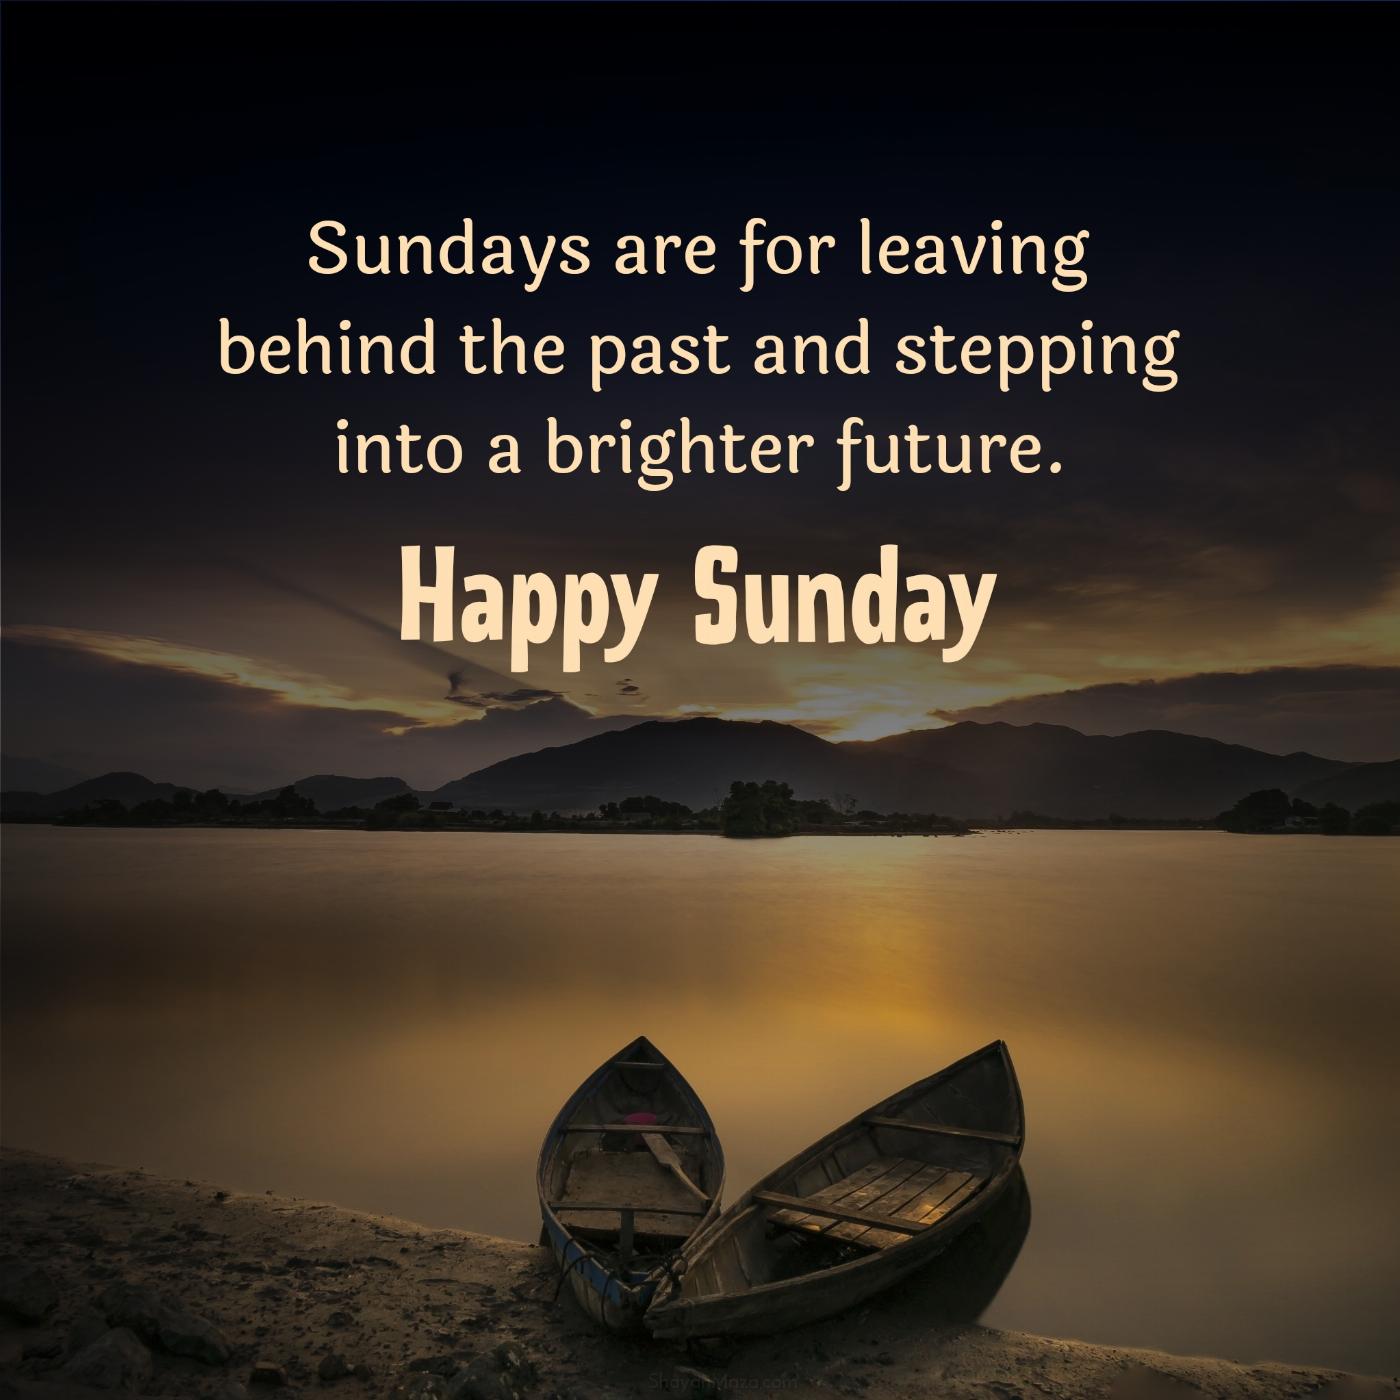 Sundays are for leaving behind the past and stepping into a brighter future